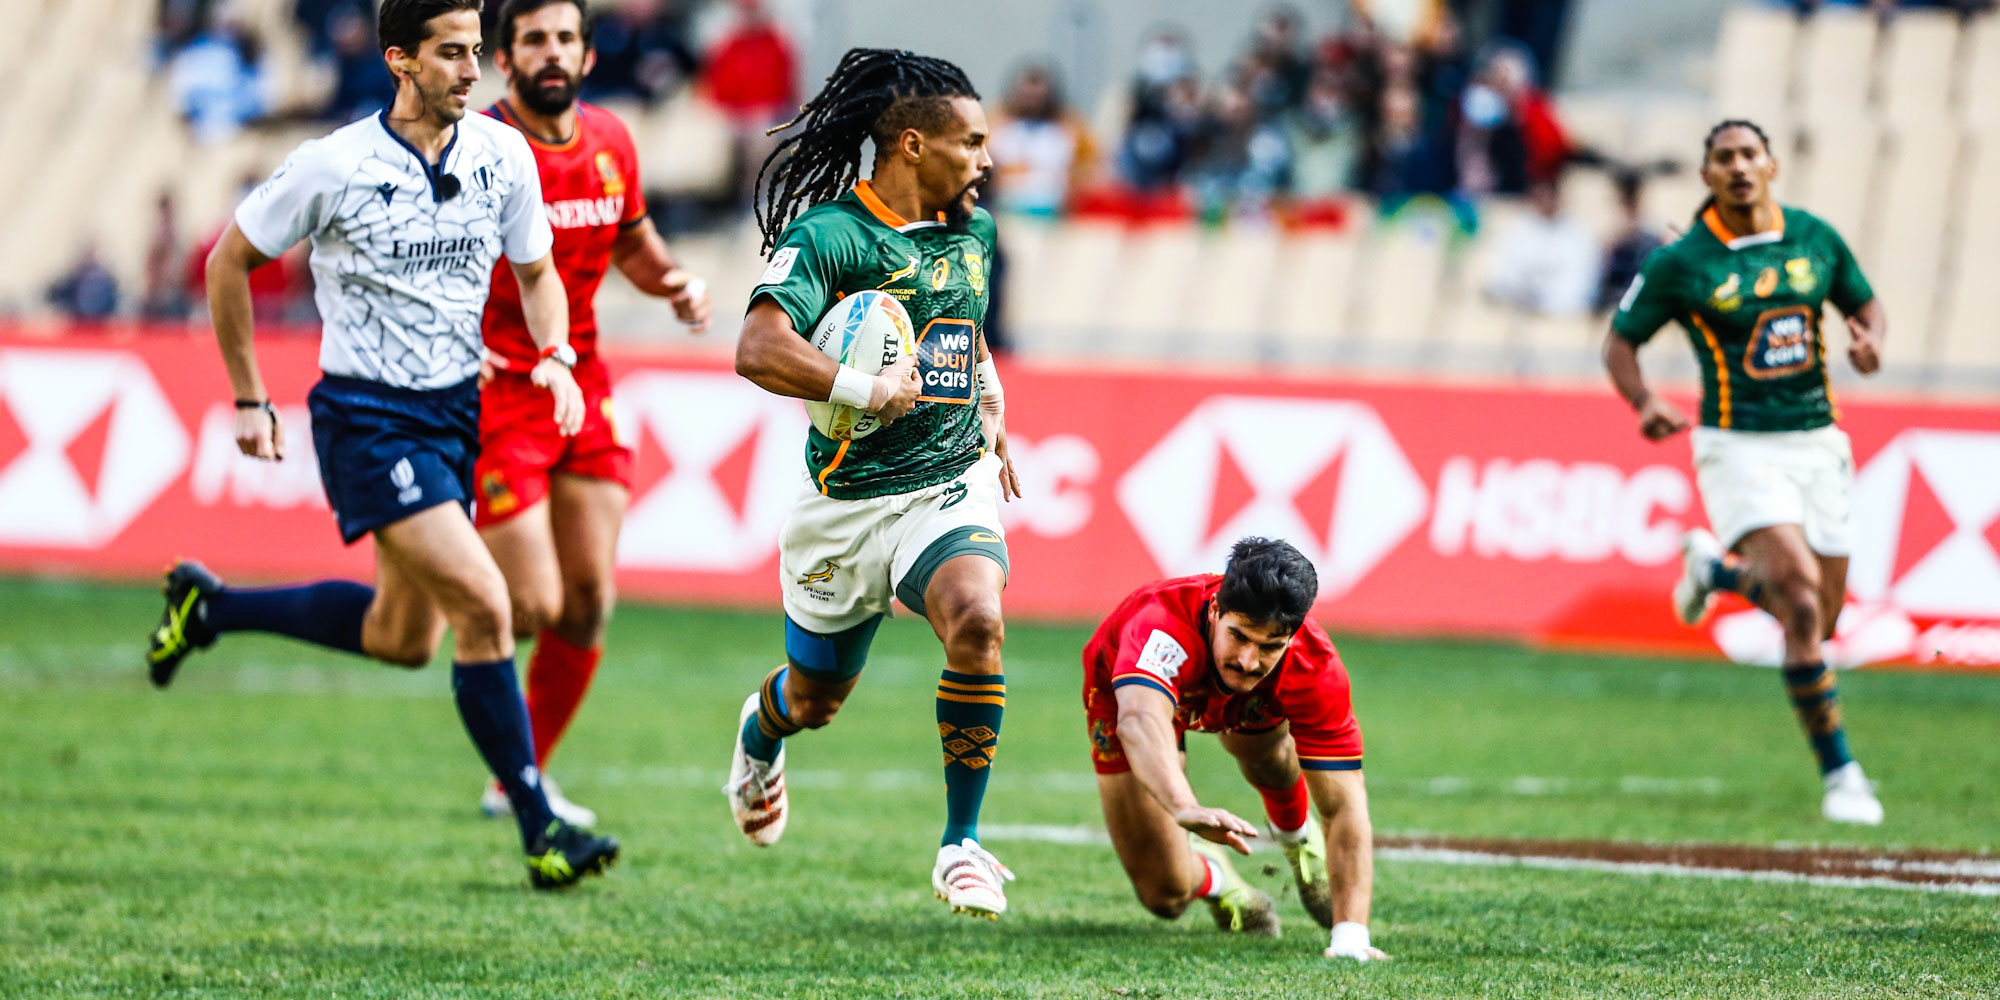 Selvyn Davids scored twice in the Blitzboks' first game, against Spain.